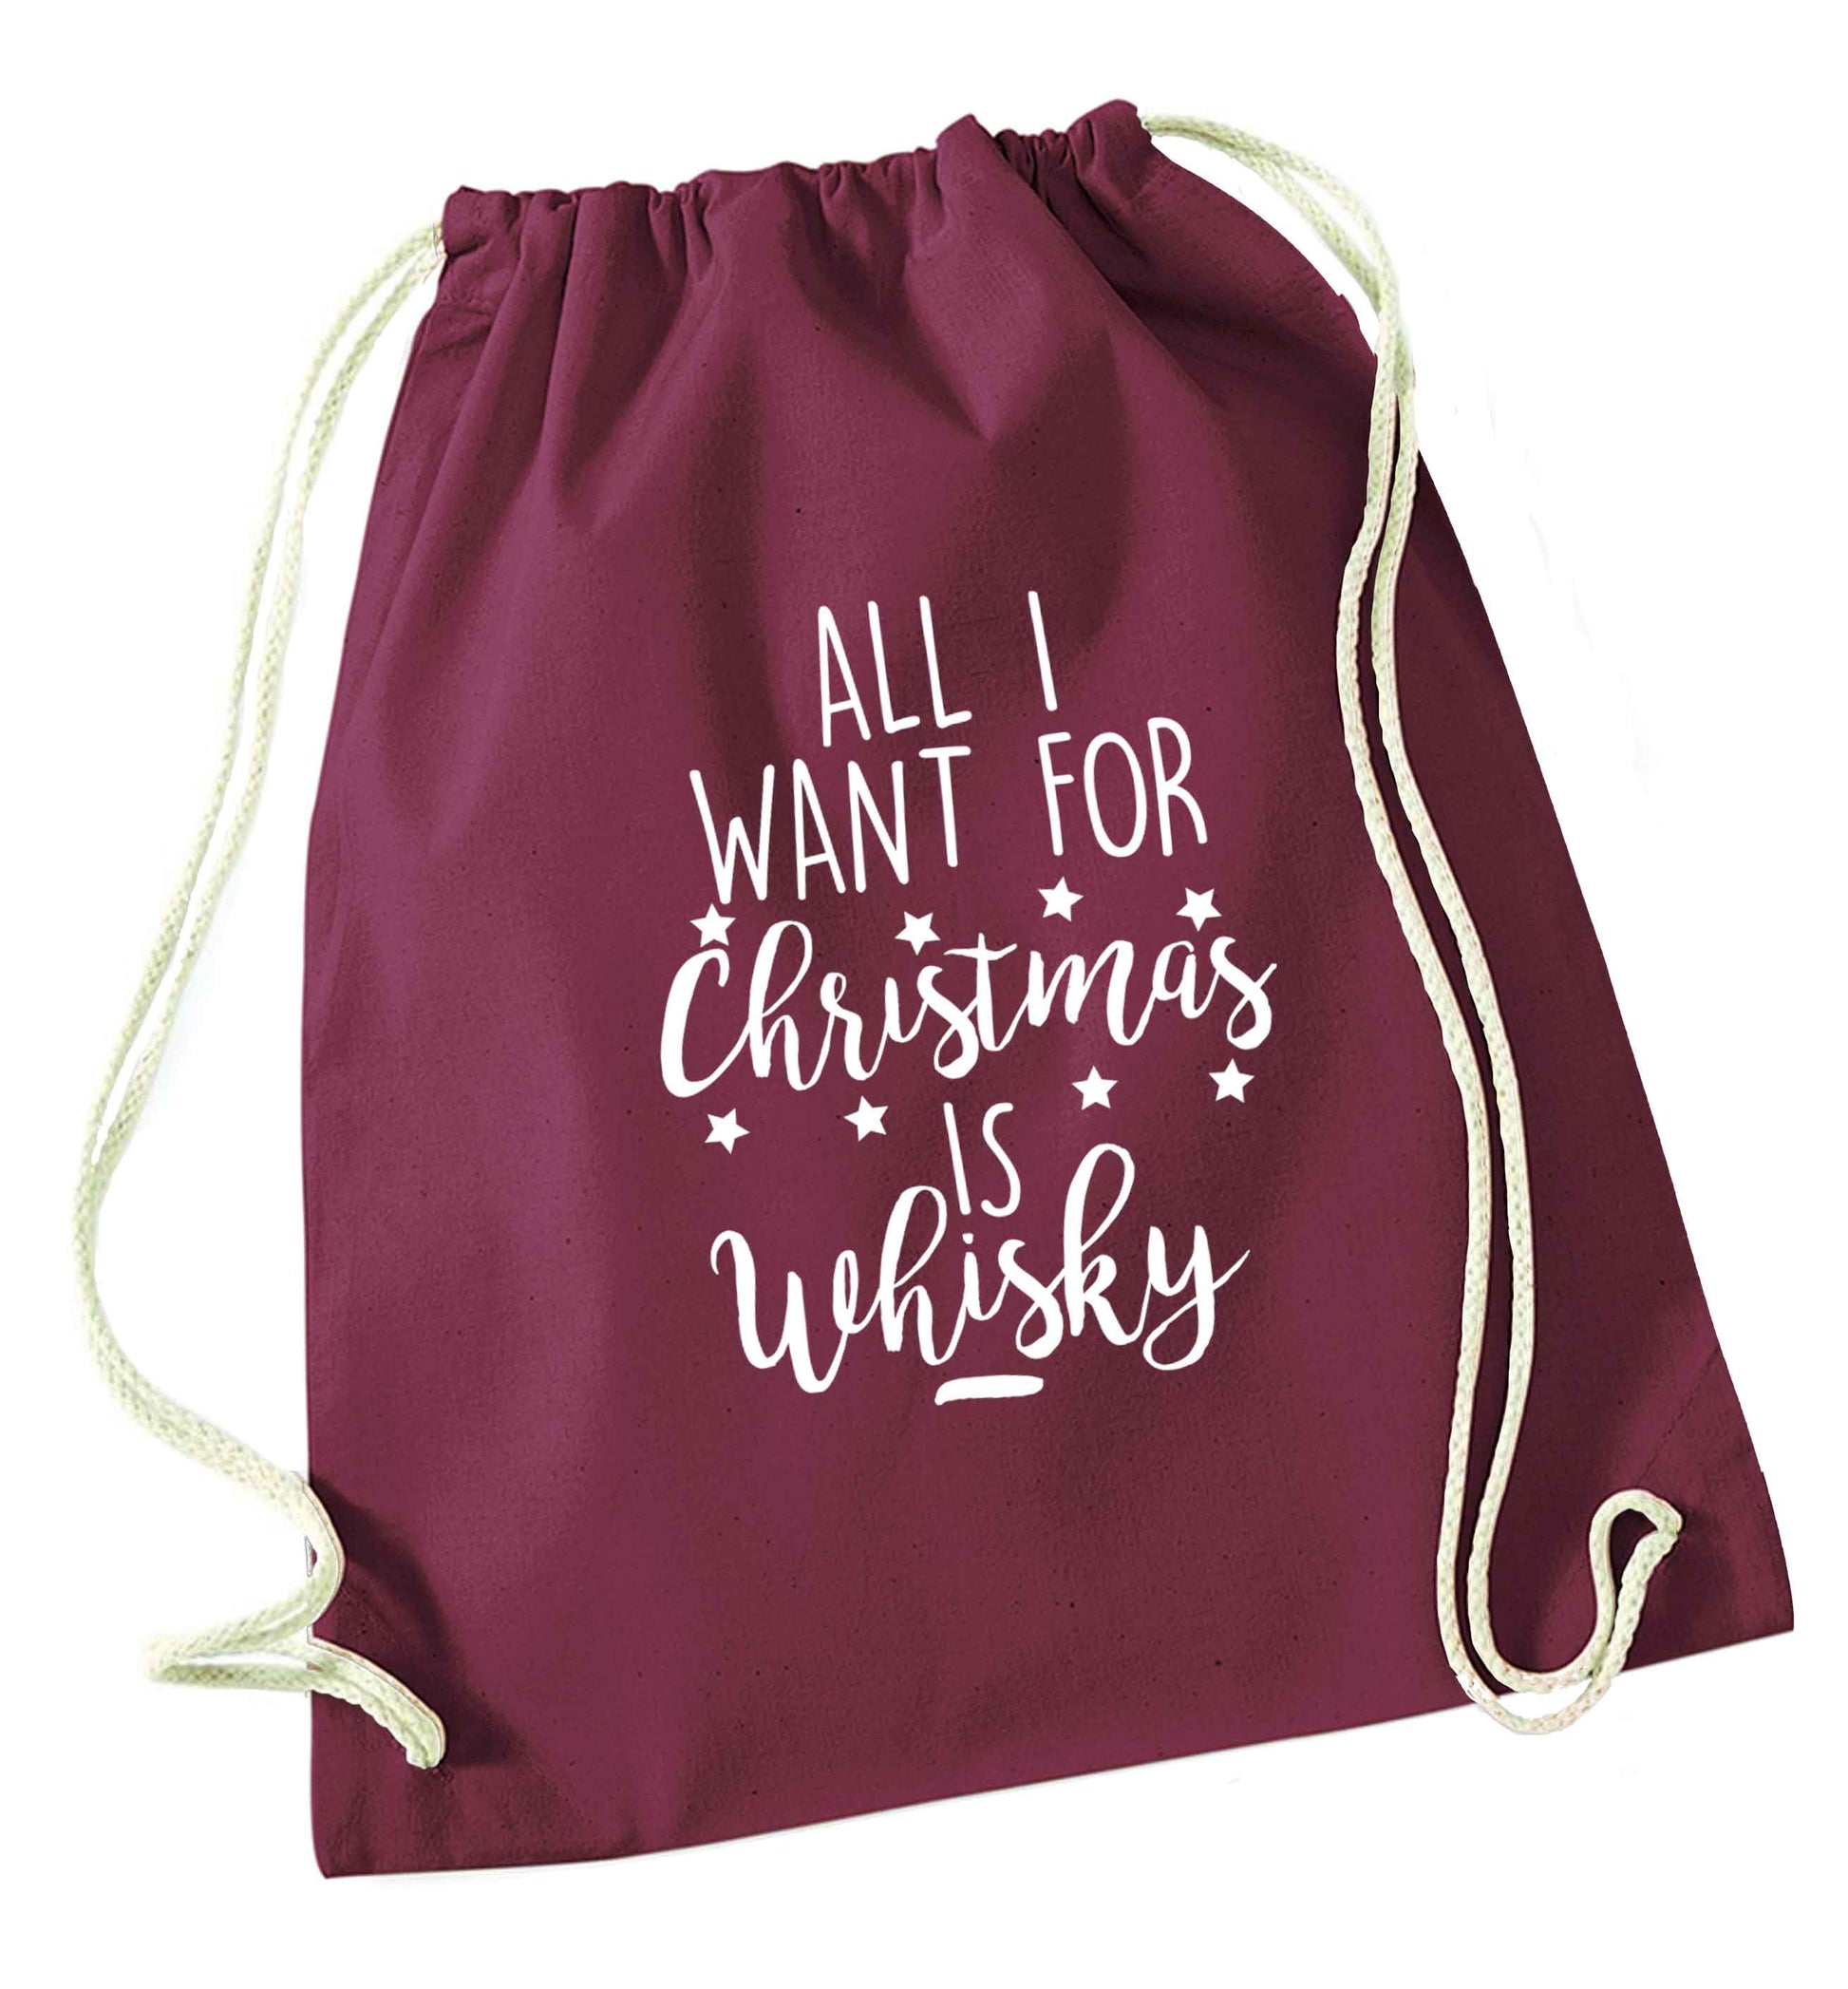 All I want for Christmas is whisky maroon drawstring bag